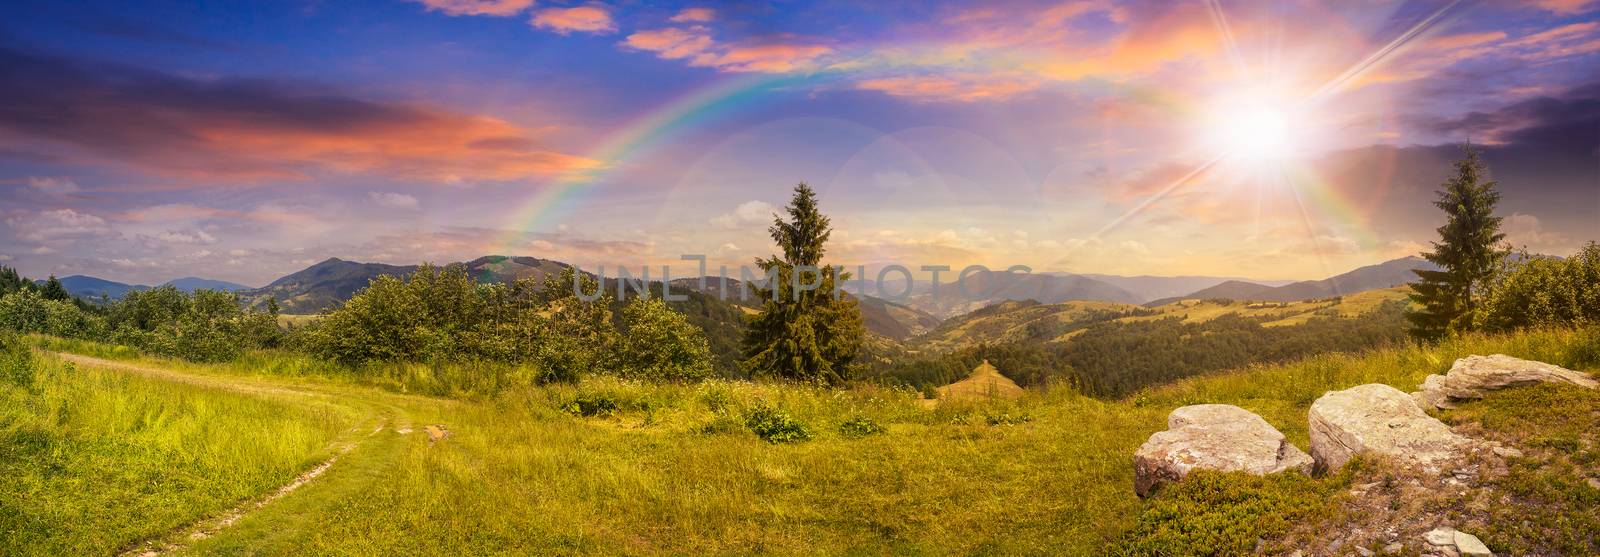 pnoramic collage  landscape. boulders on the meadow with path on the hillside and two pine trees on top of mountain range in sunset  with rainbow